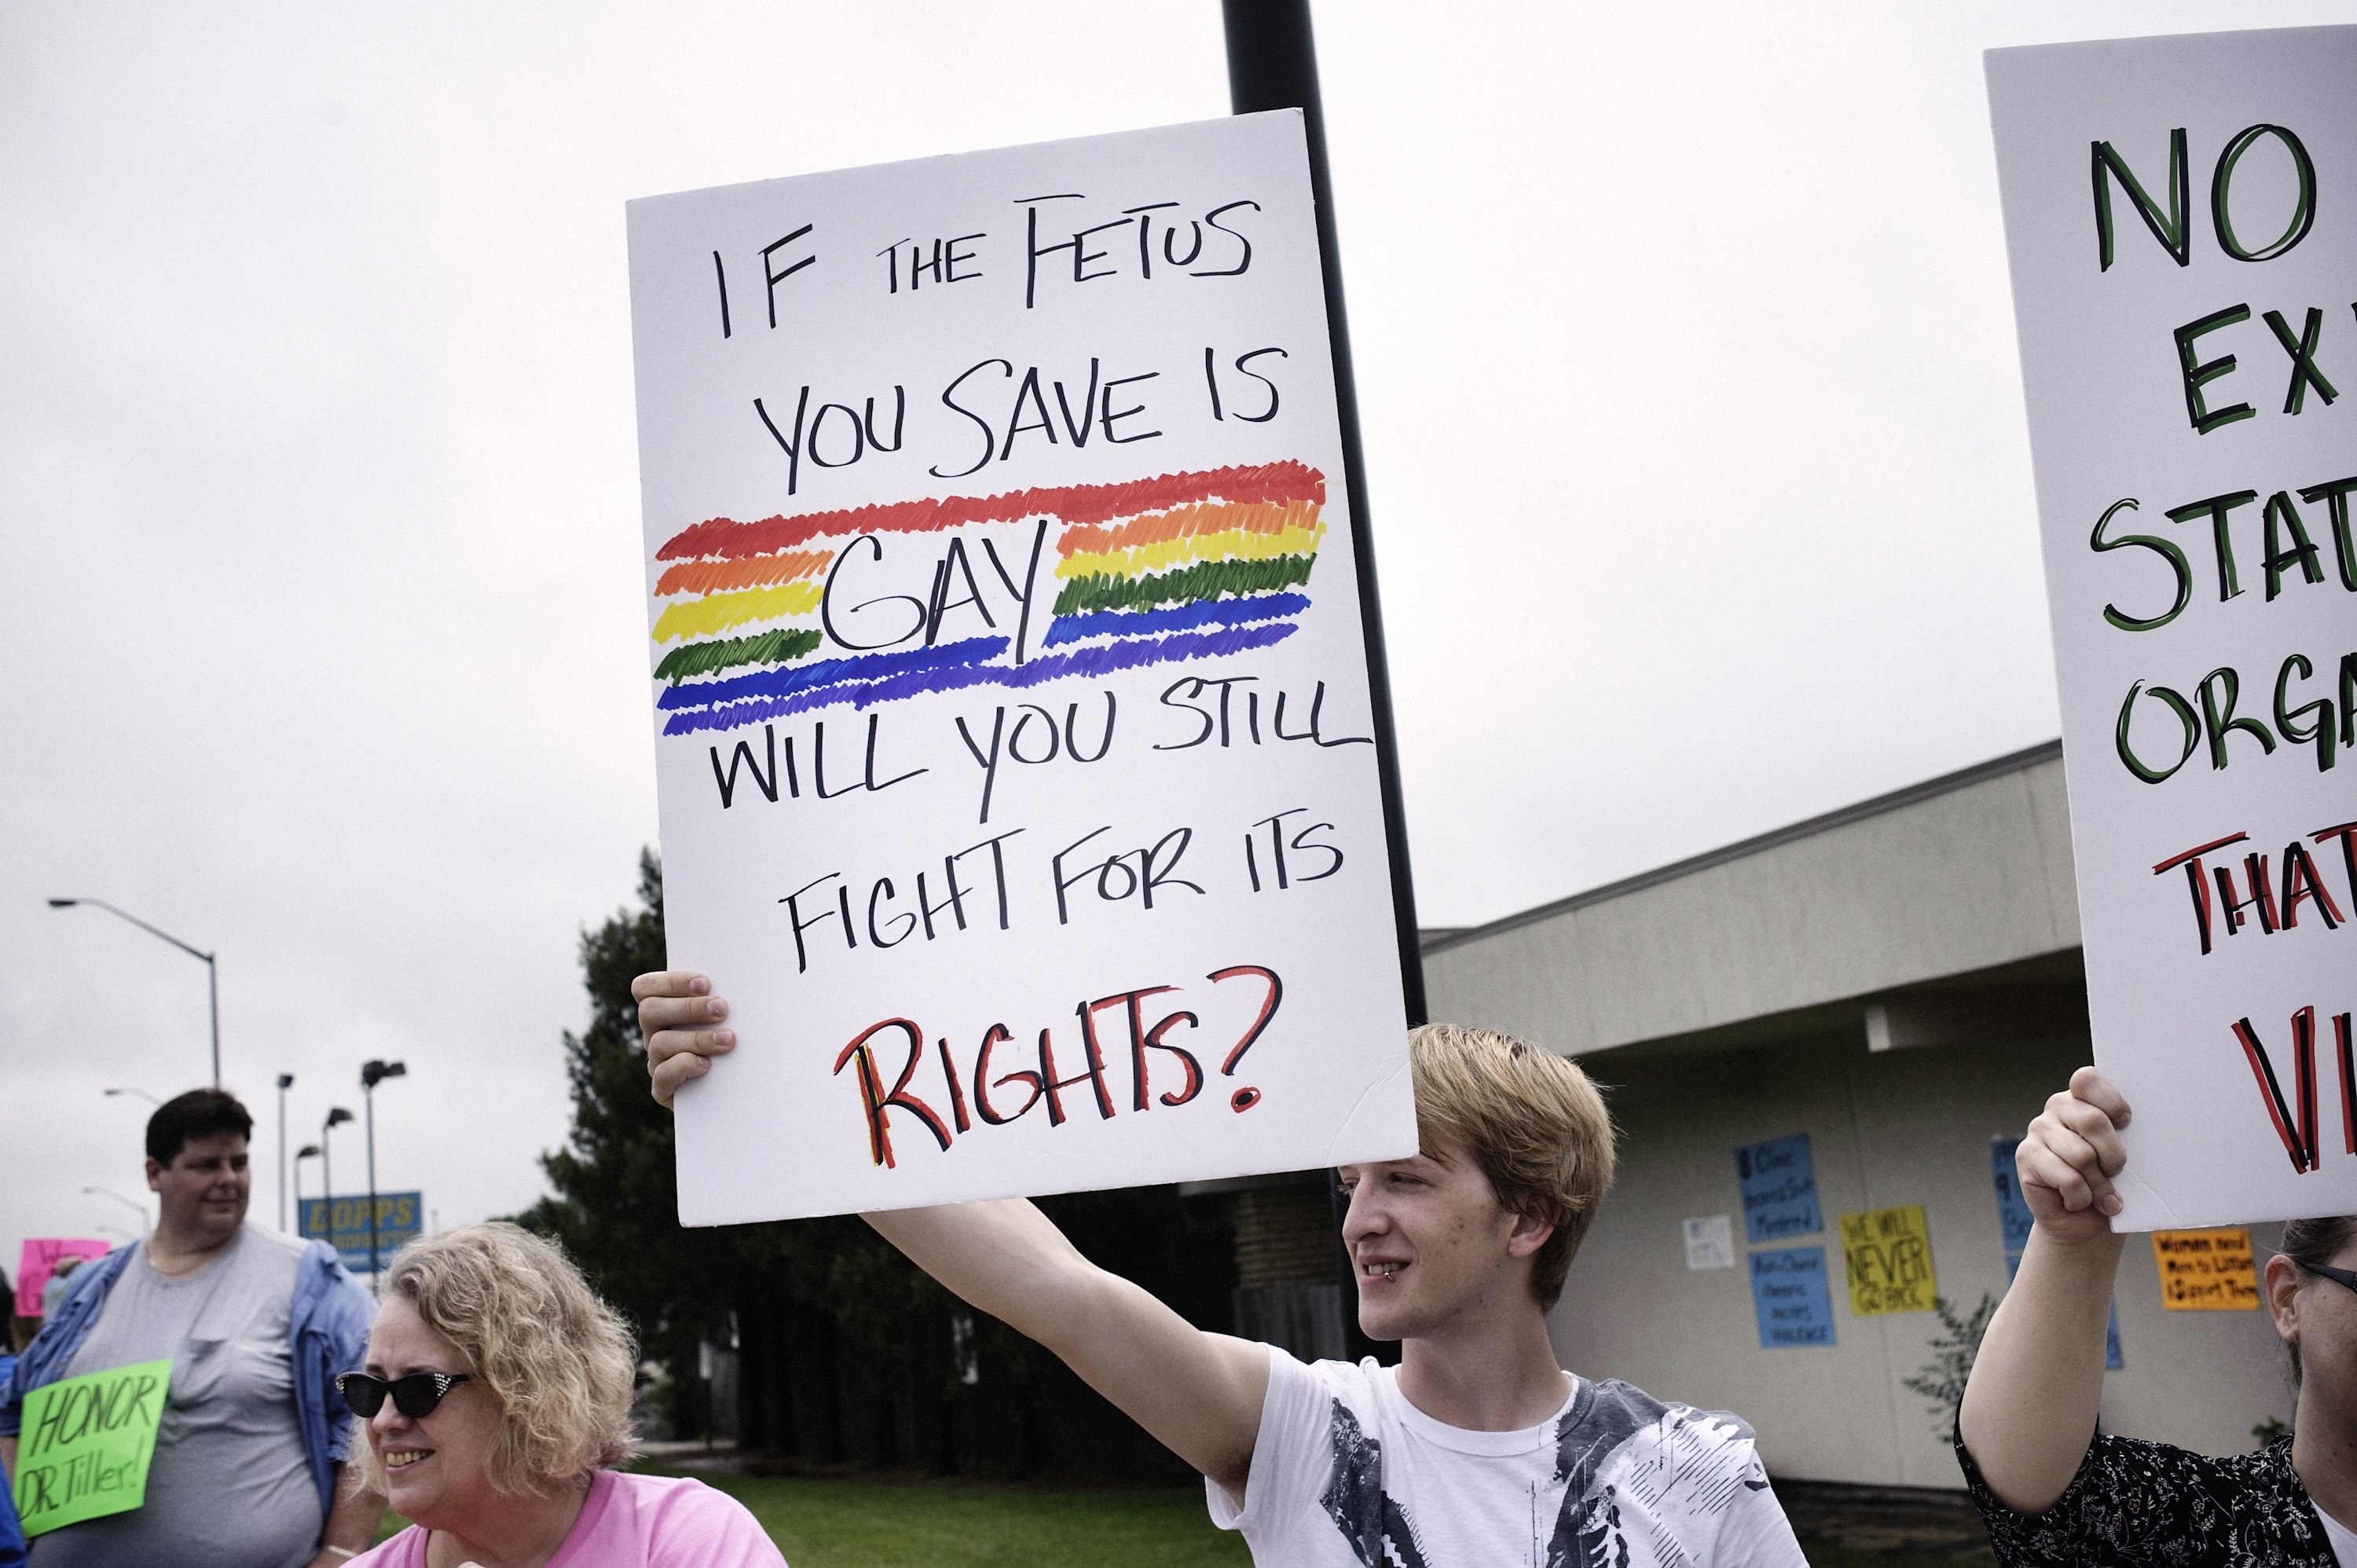 A demonstrator holds a sign reading &quot;If the fetus you save is gay, will you still fight for its rights&quot;